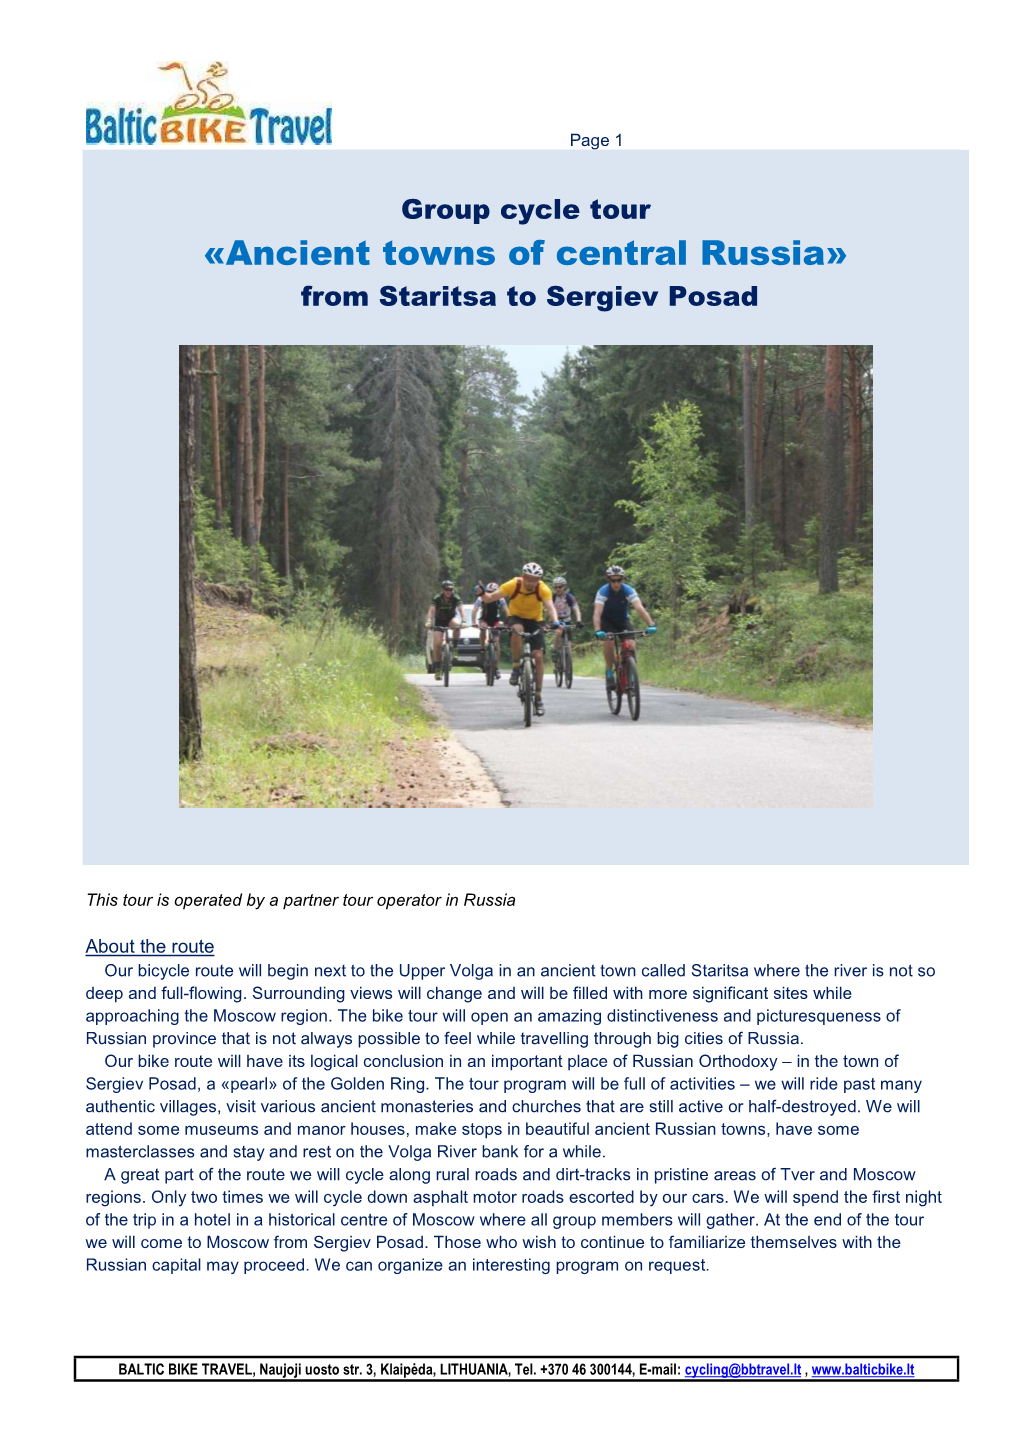 «Ancient Towns of Central Russia» from Staritsa to Sergiev Posad